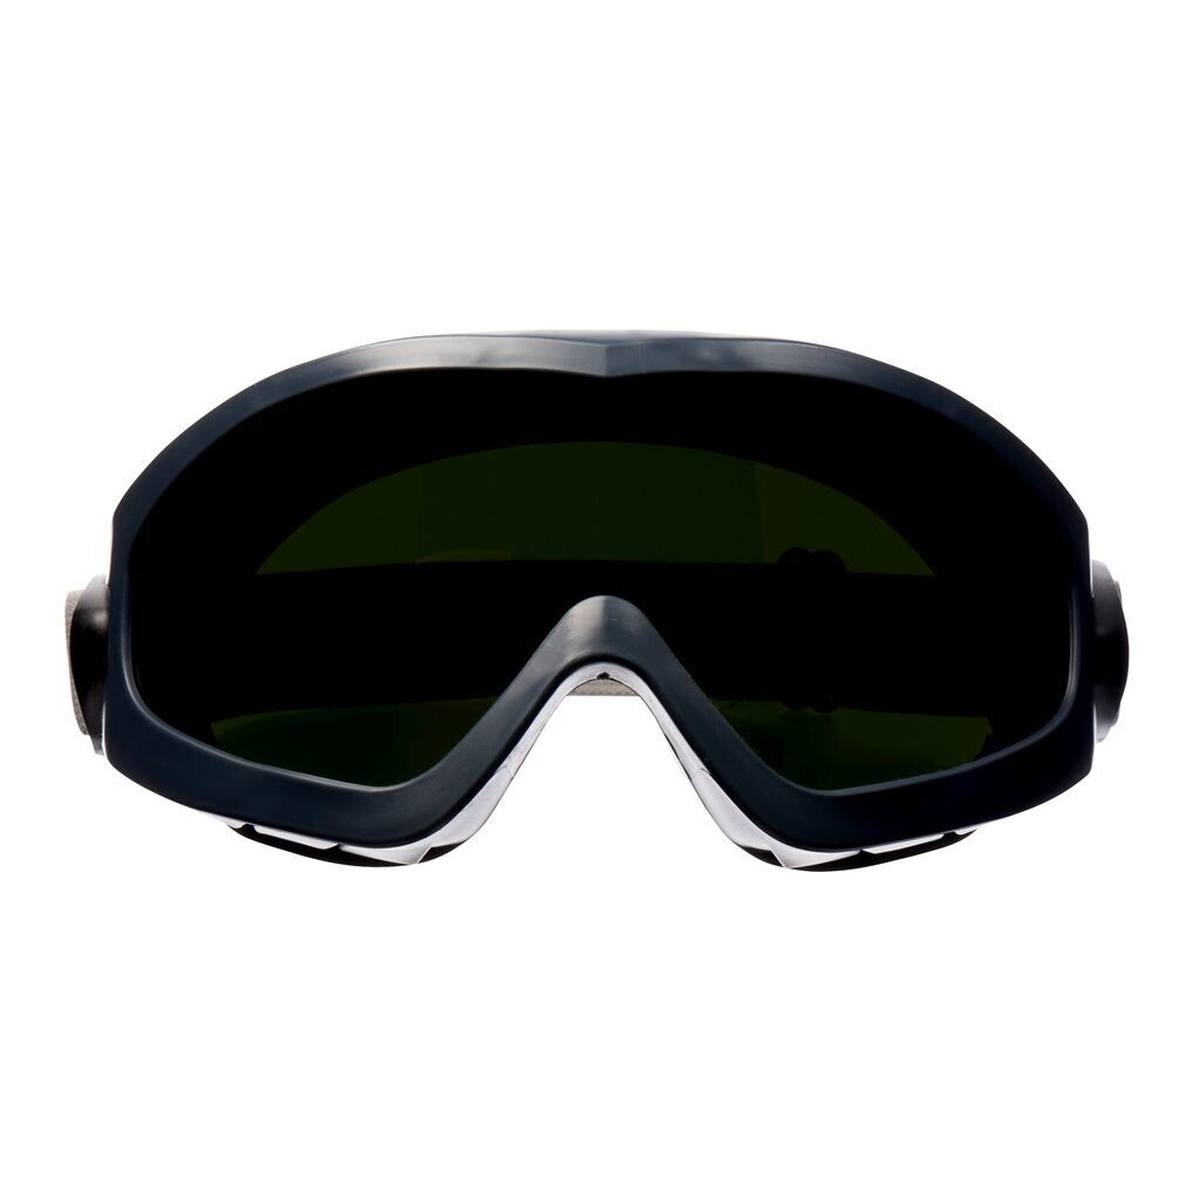 3M 2895S Full-vision goggles, IR 5.0 coating, AS/AF/UV, PC, without ventilation slots (gas-tight), adjustable hinges